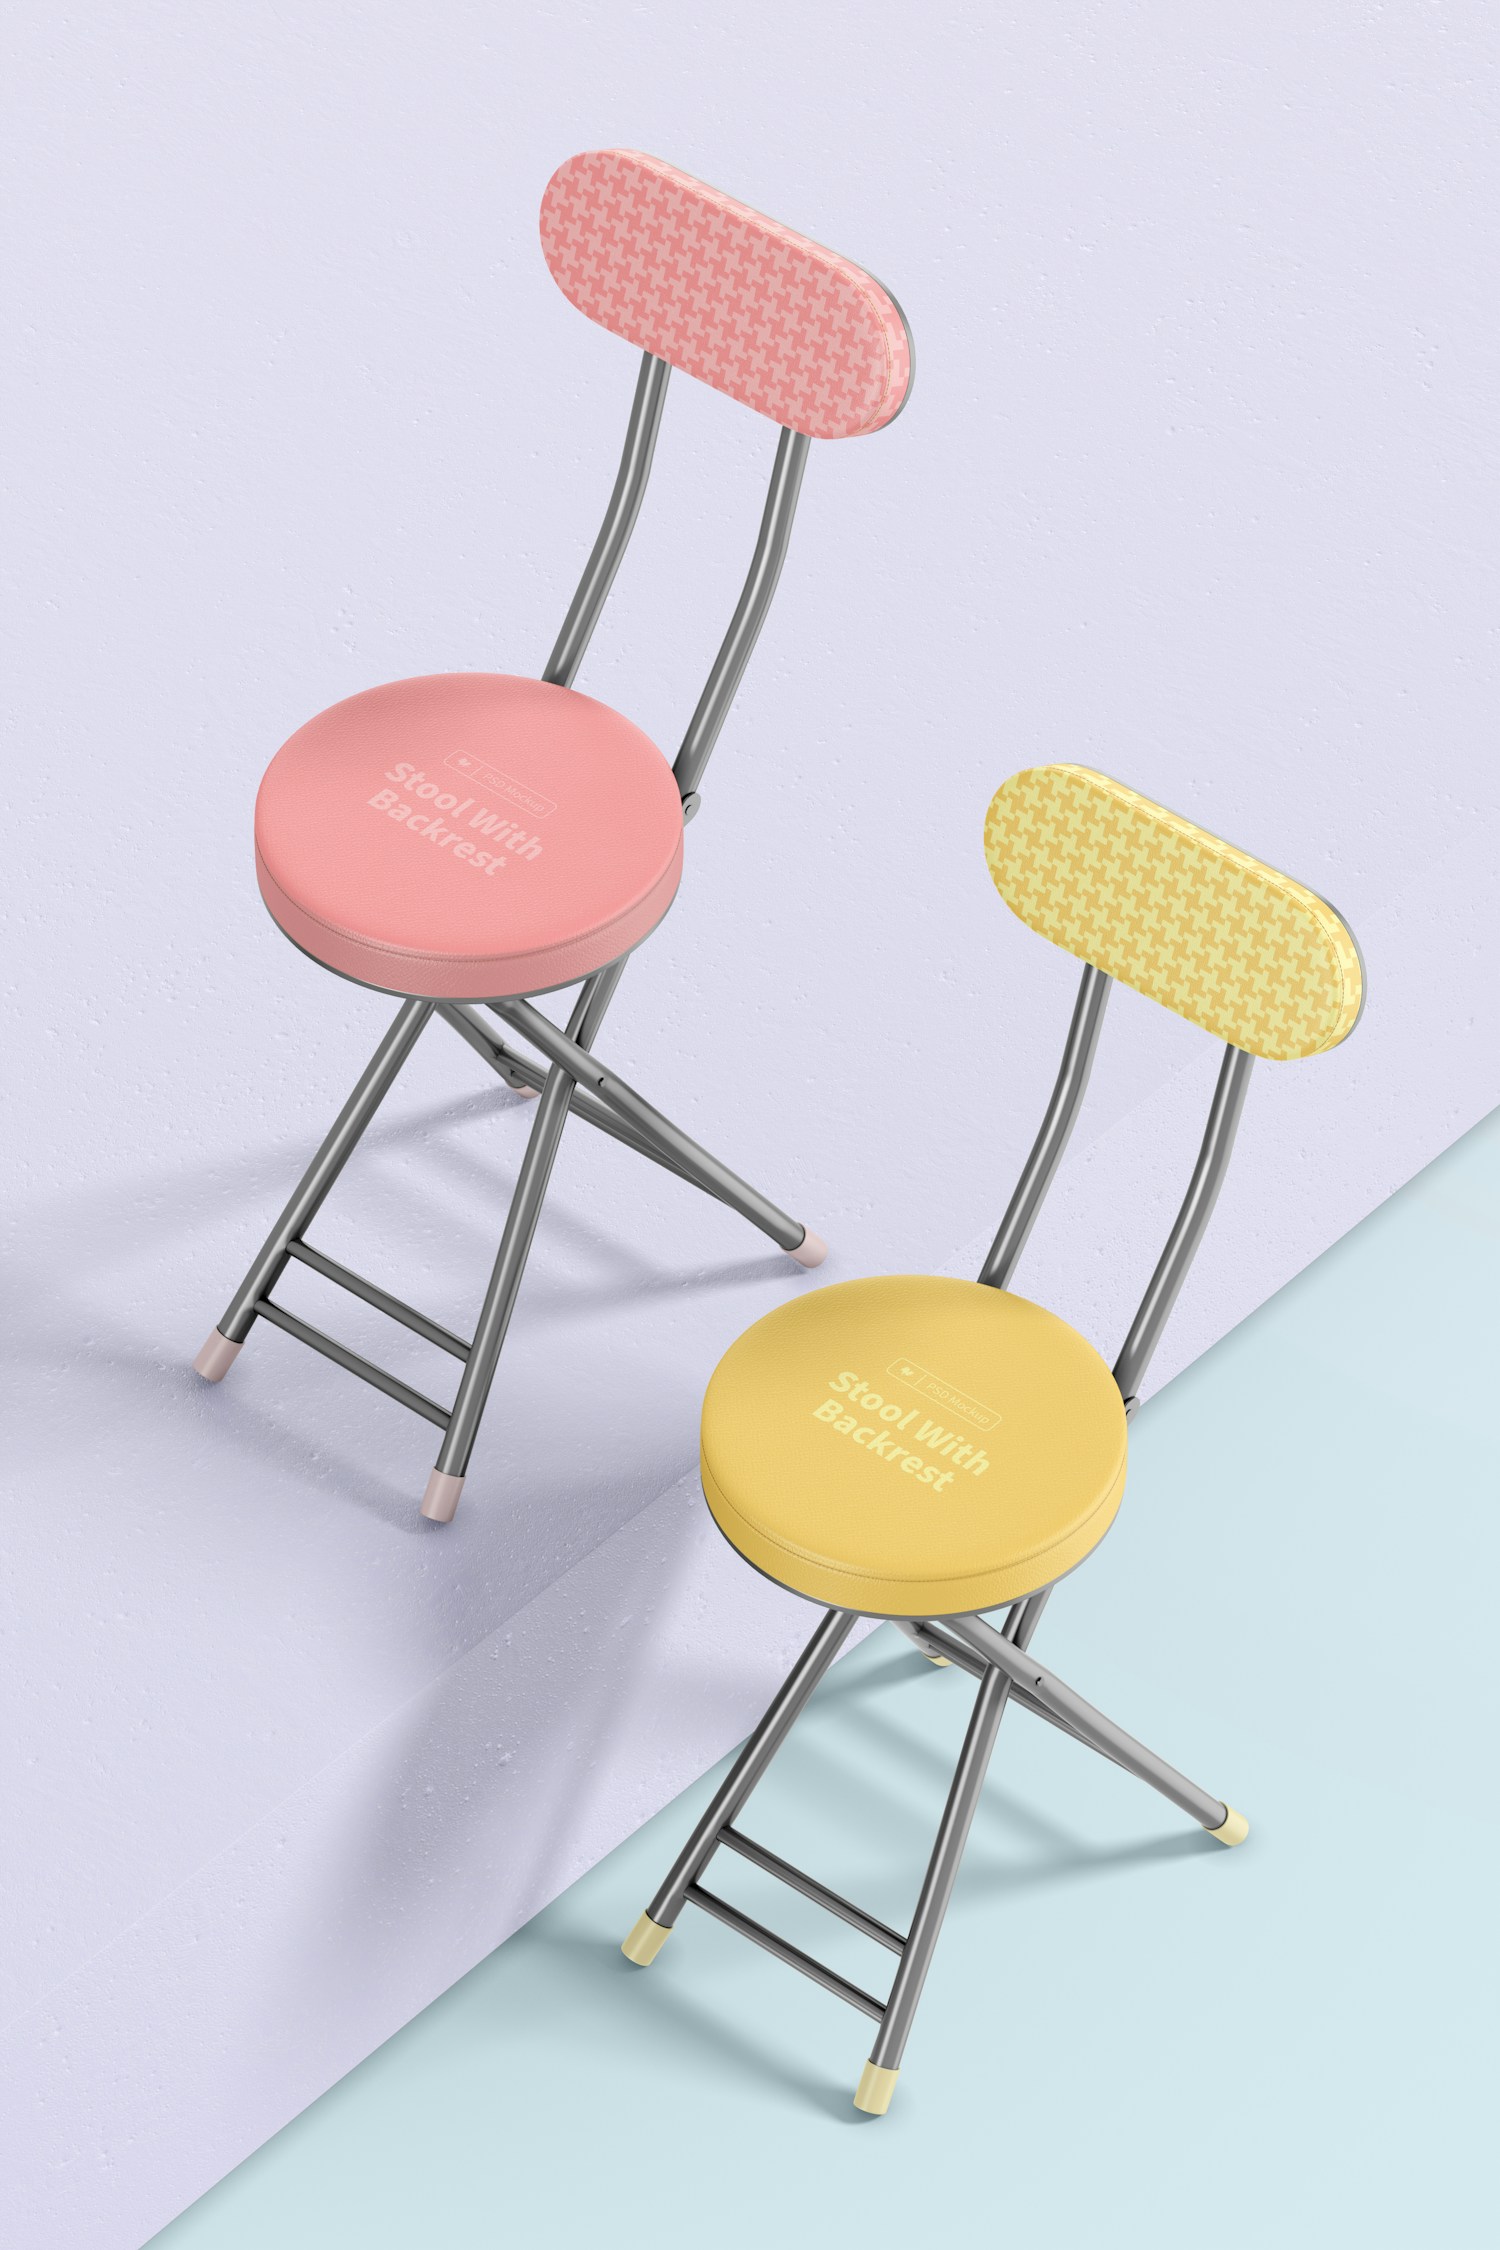 Stools with Backrest Mockup, Top View